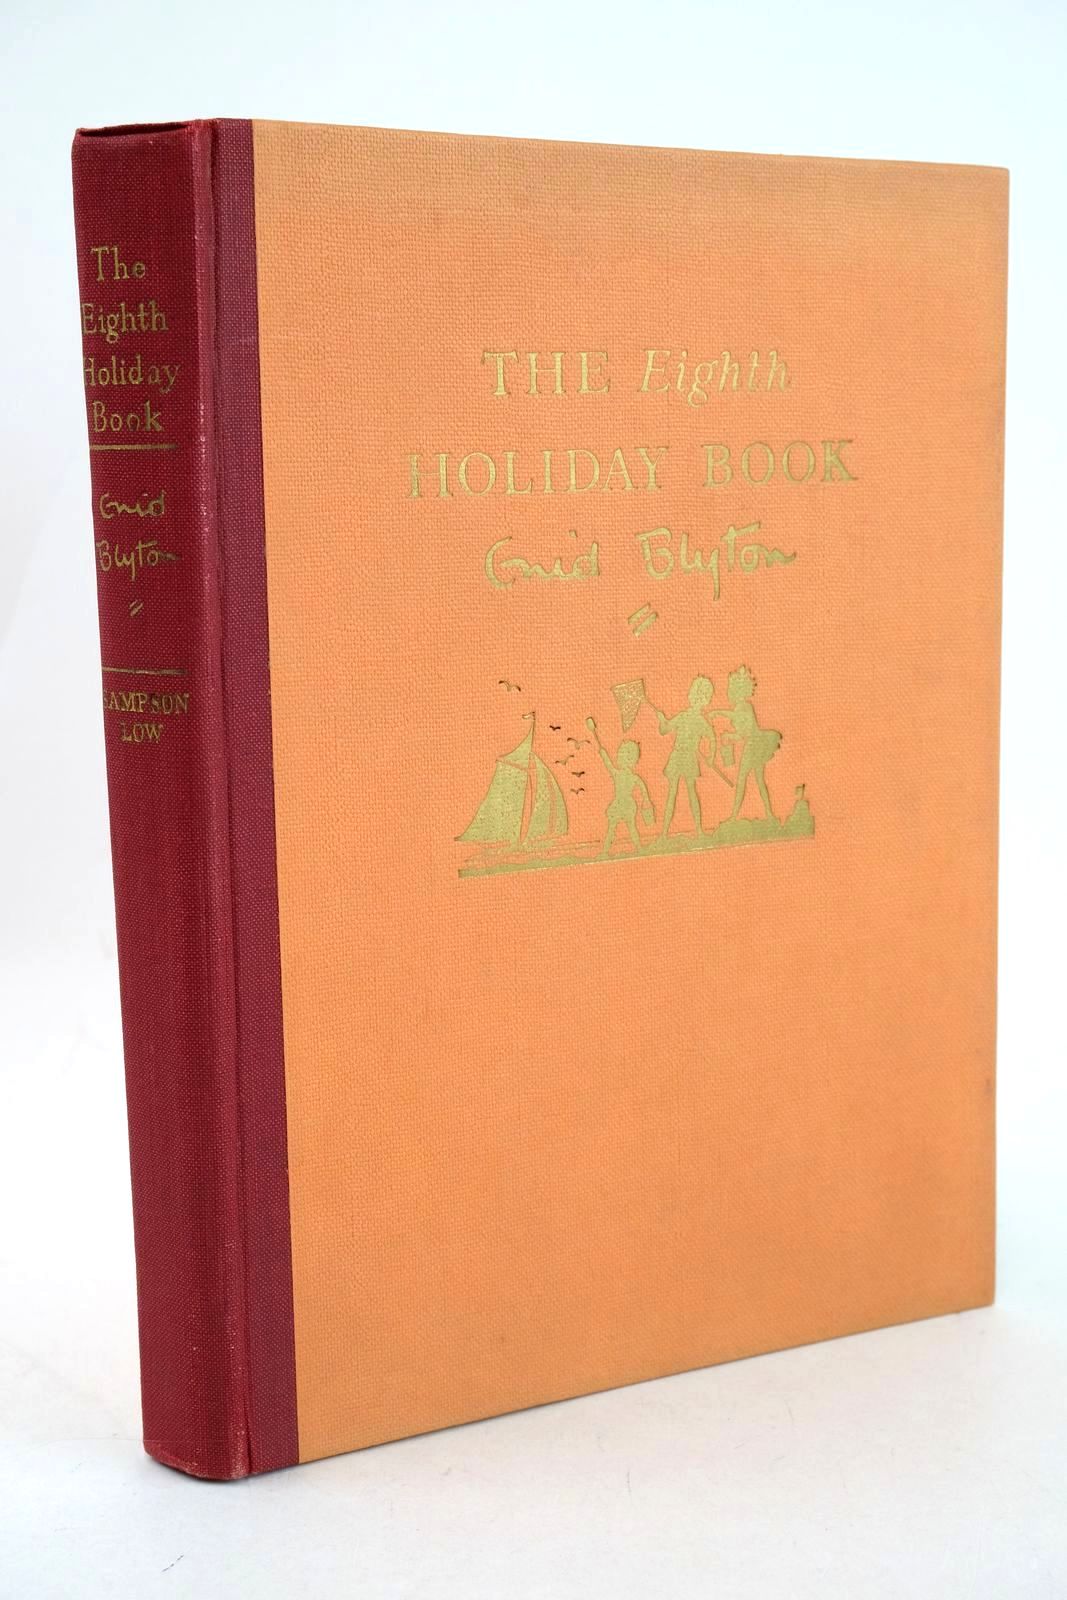 Photo of THE EIGHTH HOLIDAY BOOK written by Blyton, Enid illustrated by Dawson, E.M. Lodge, Grace et al.,  published by Sampson Low, Marston &amp; Co. Ltd. (STOCK CODE: 1326831)  for sale by Stella & Rose's Books